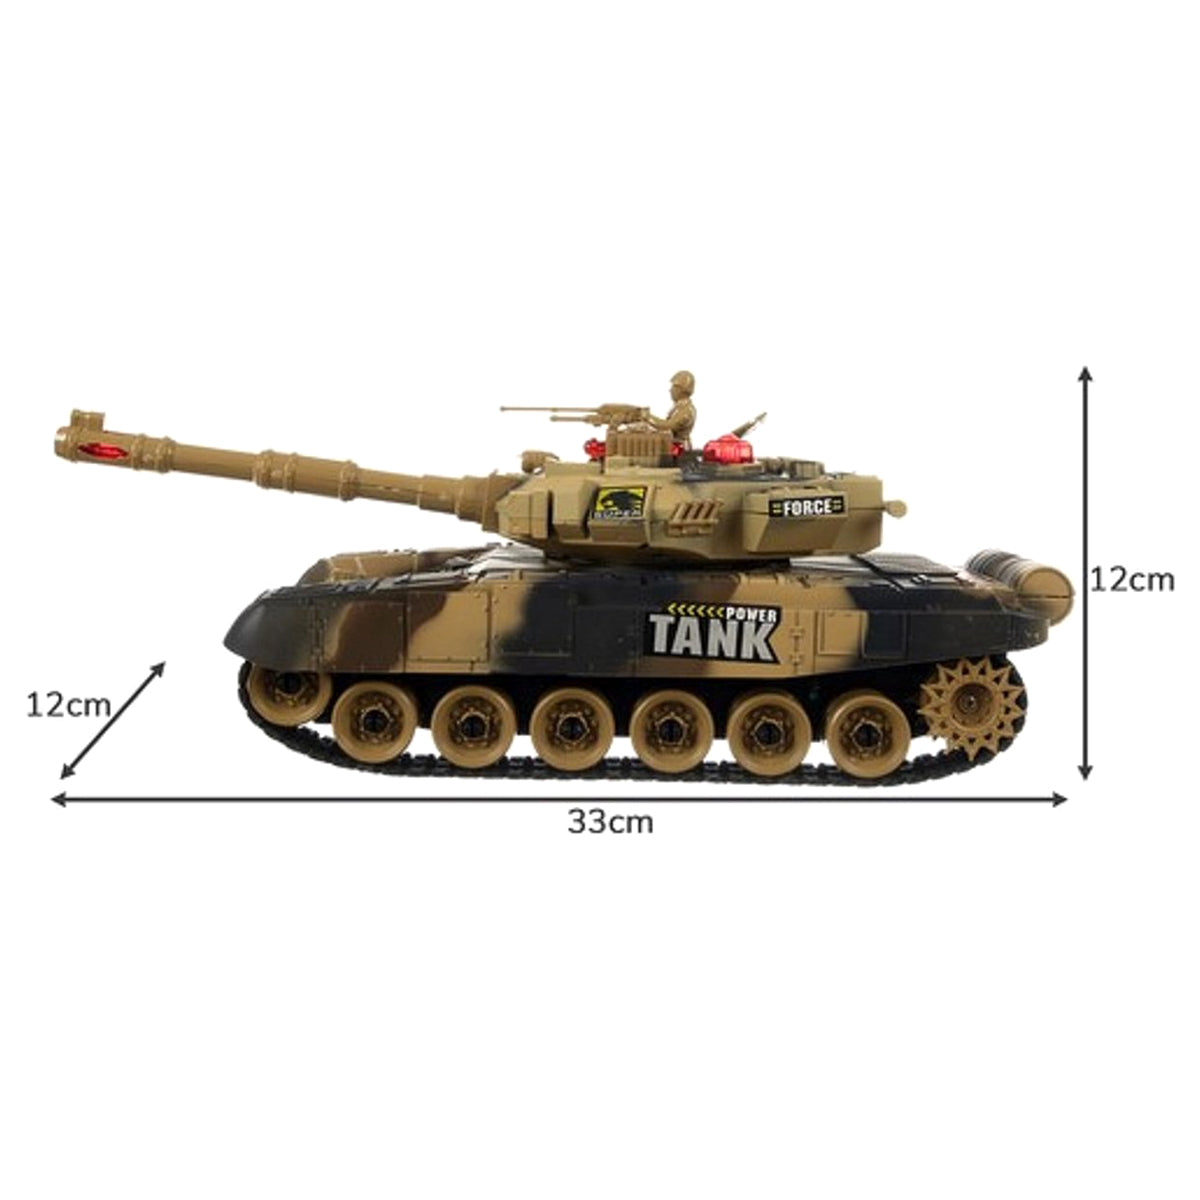 <tc>Ariko</tc> XXL RC Toy Tank - Beige - Remote Controlled Radio Tank With Remote Control - With Sound & Light Effects - With Internal Battery - 2.4Gz - Scale 1:14